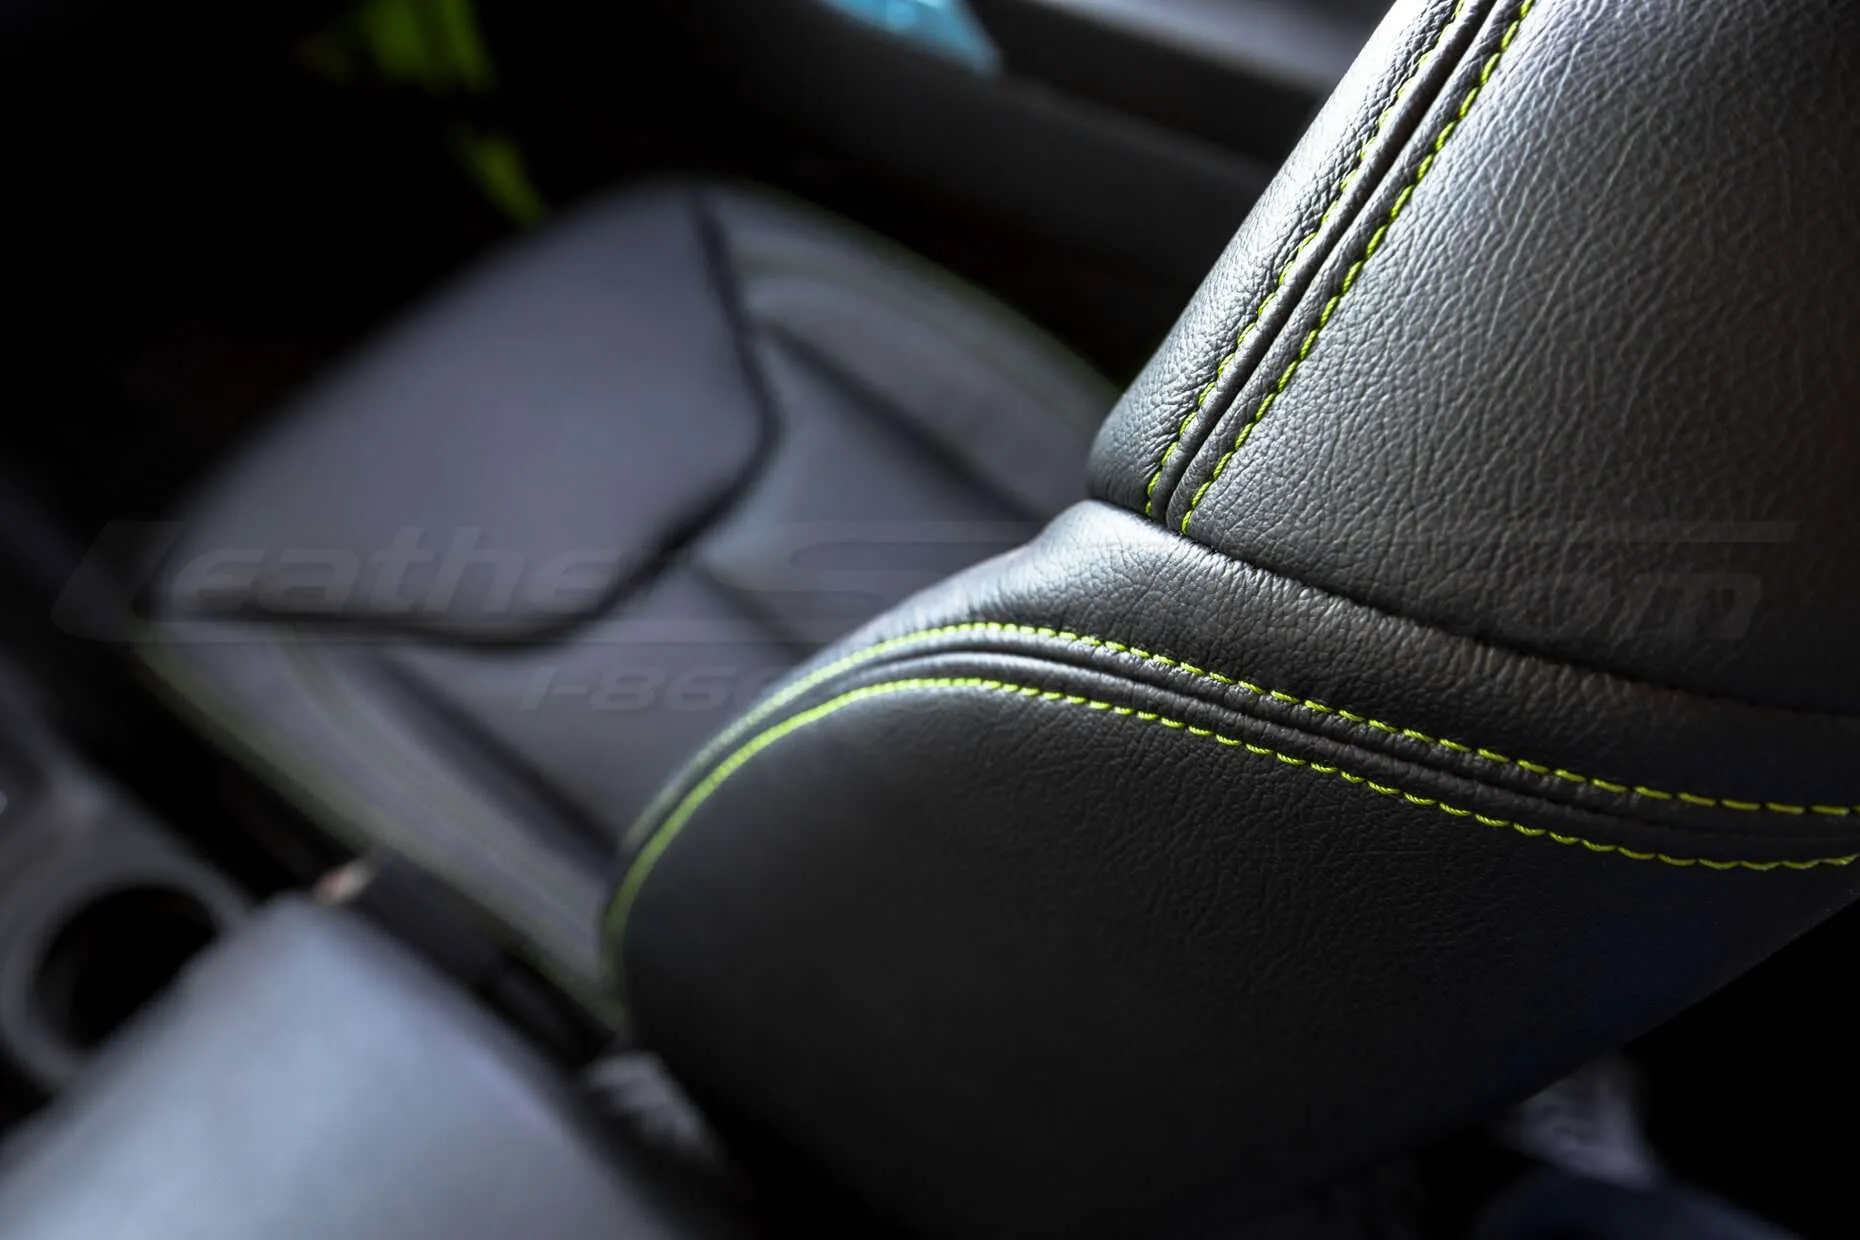 Jeep Wrangler Installed Leather Seats - Black & Piazza Green - Backrest and headrest stitching close-up